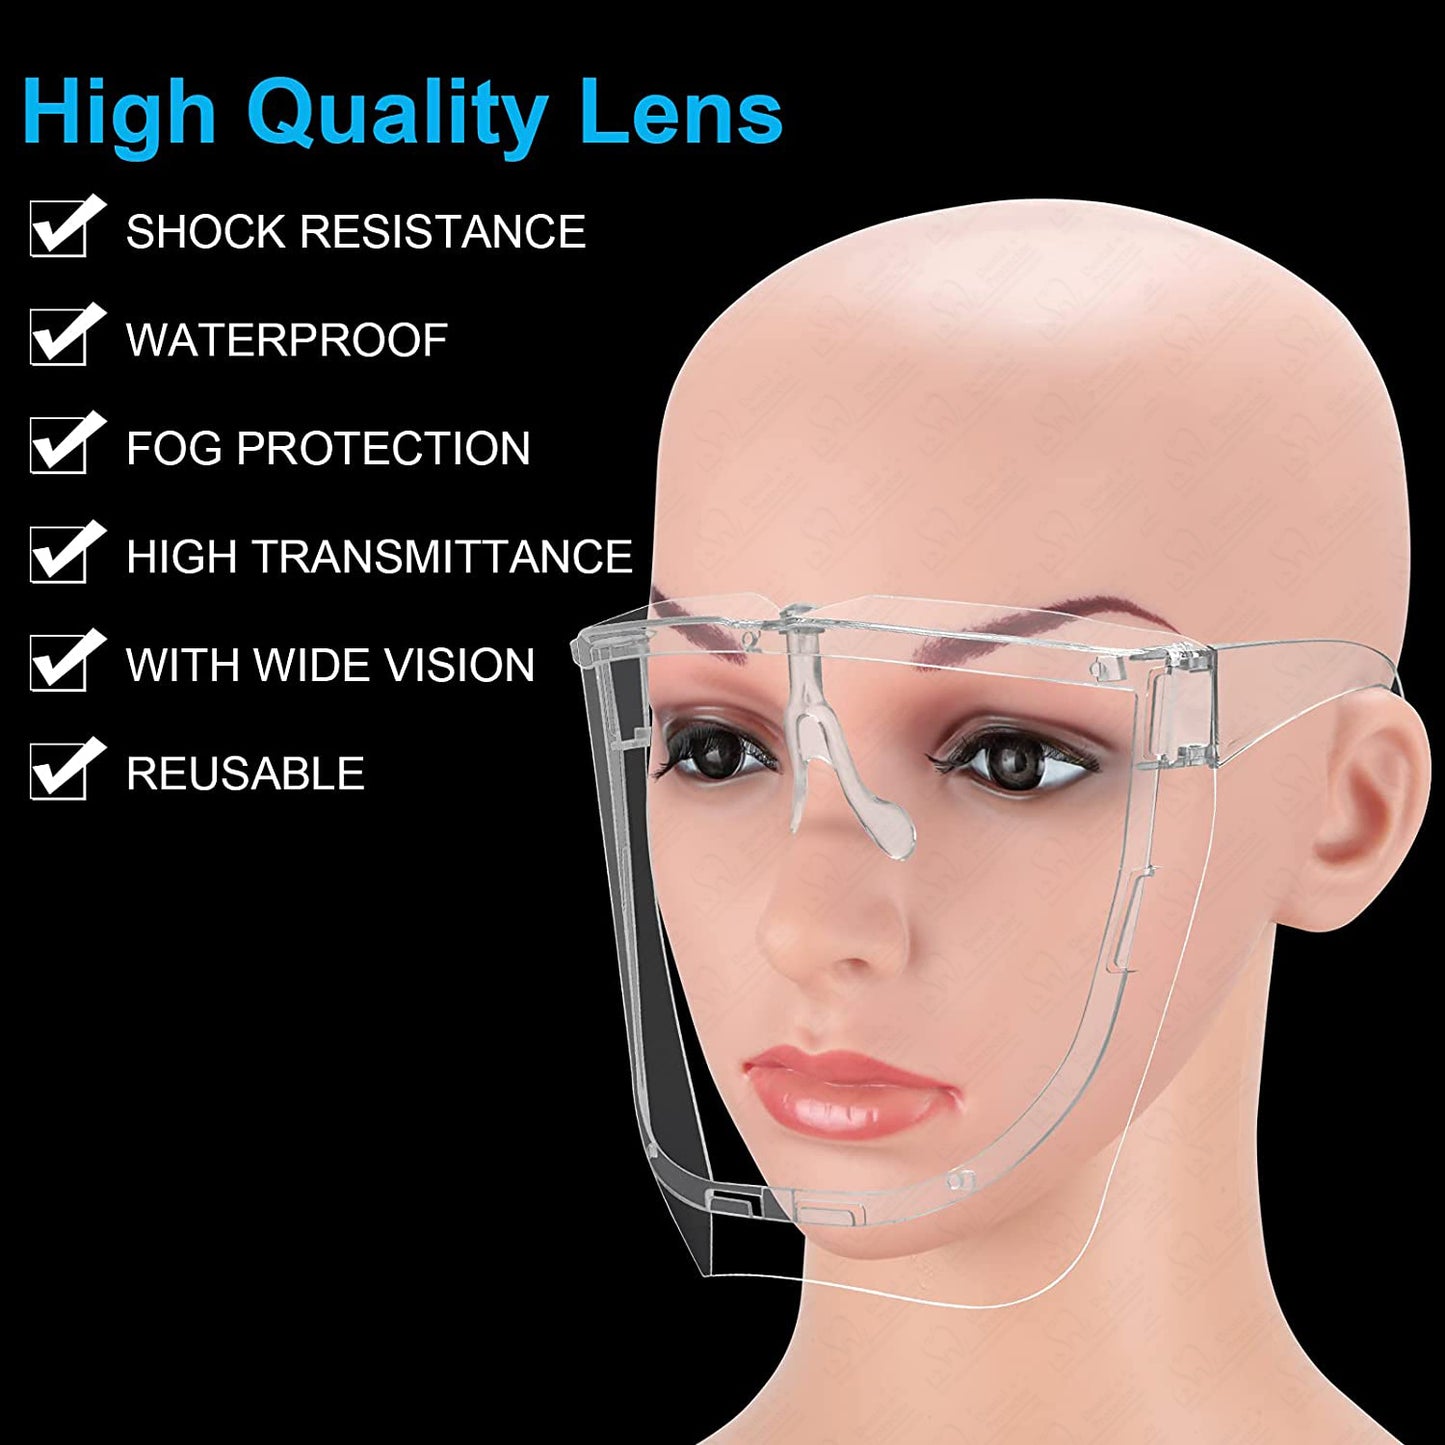 5 Pack Safety Face Shields,Ultra Clear Protective Full Face Shield to Protect Eyes, Nose, Mouth - Reusable Anti-Fog Transparent PET Plastic, Goggles, For Men Women, Indoor and Outdoor Activities Use